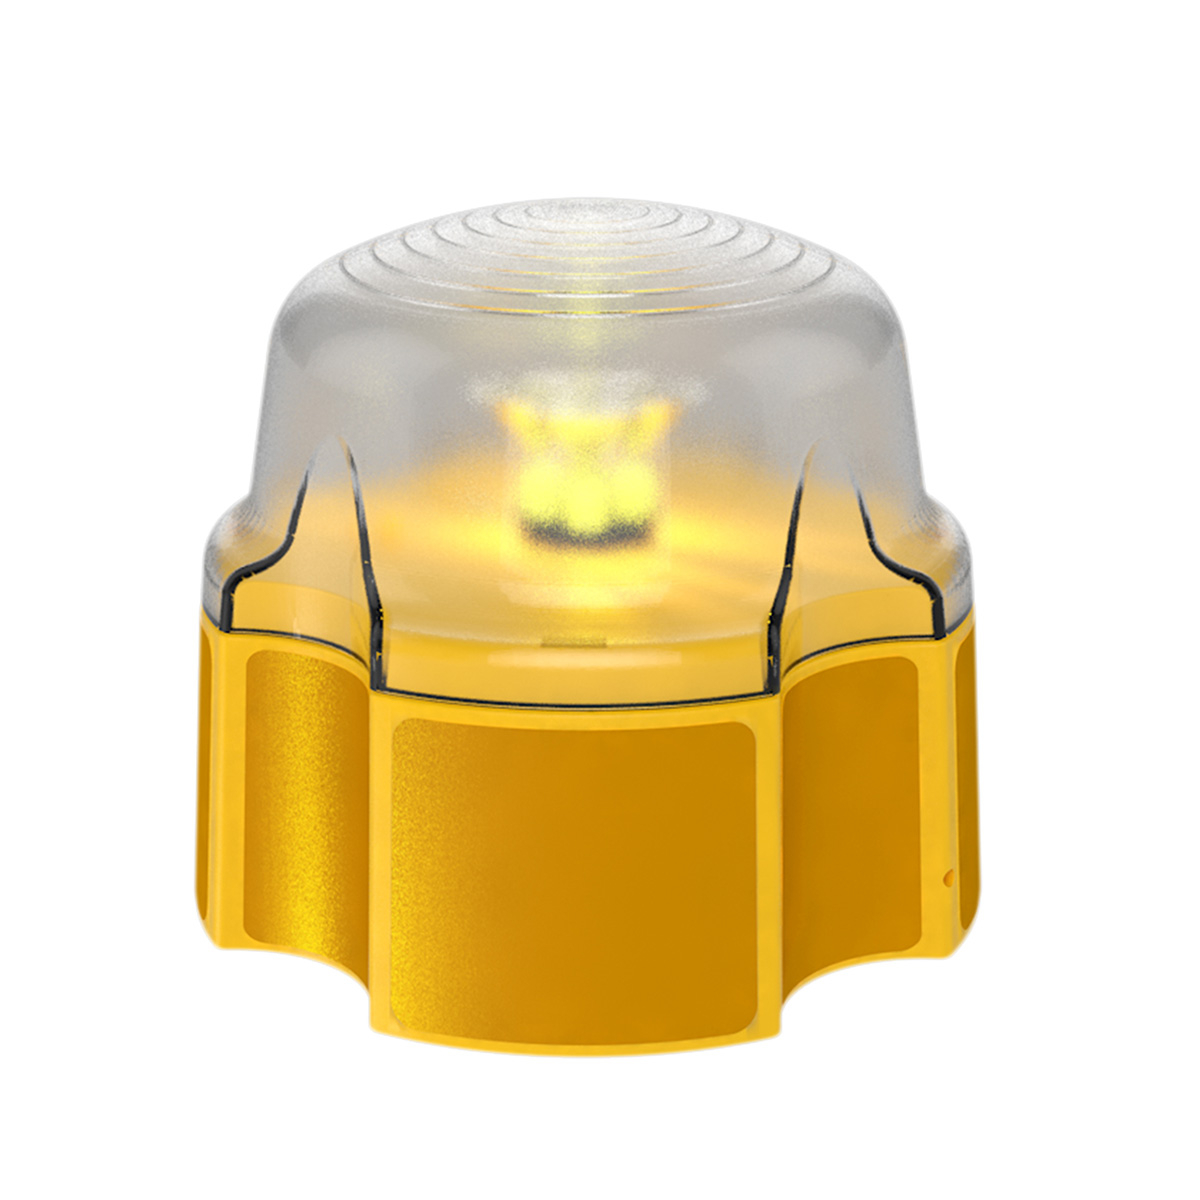 Skipper™ Safety Barrier System Accessories - Rechargeable Safety Light. Attaches to Skipper and Skipper XS Units. On, Off or Flashing Modes. Automatic Low-Light Sensor